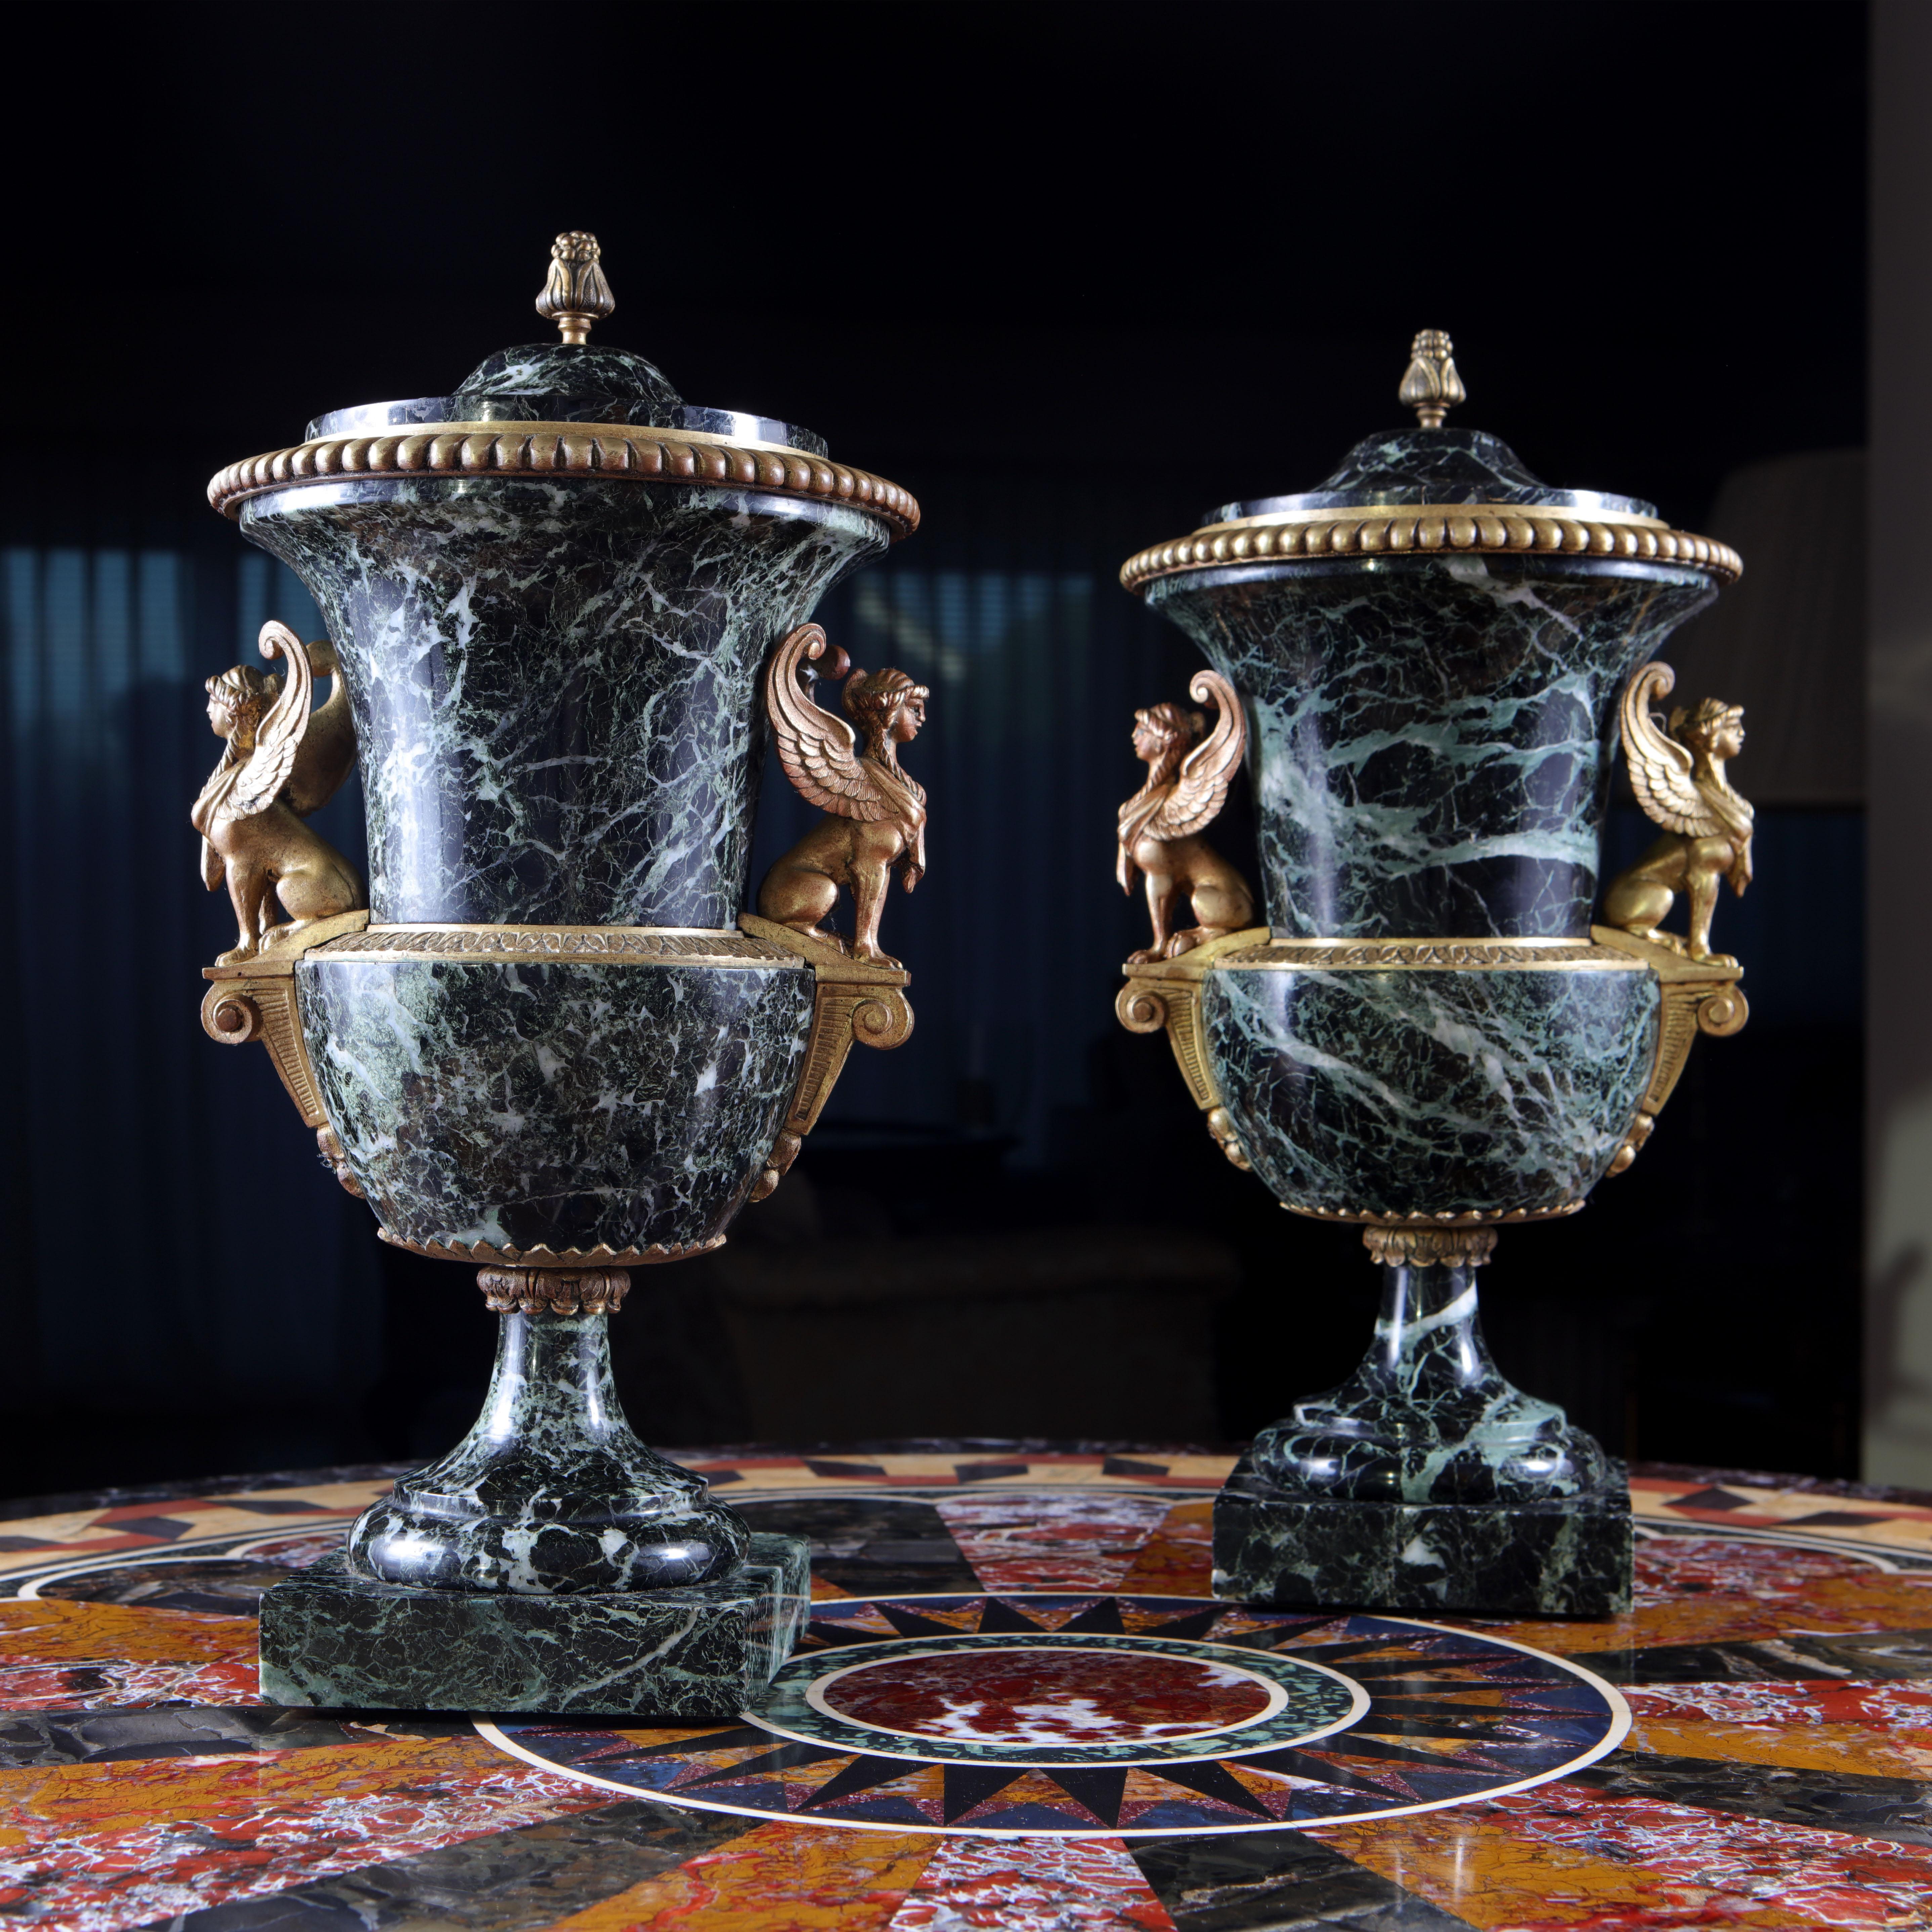 Pair of Campagna form green marble urns with lids, mounted with ormolu bronzes of Egyptian inspired sphinxes.